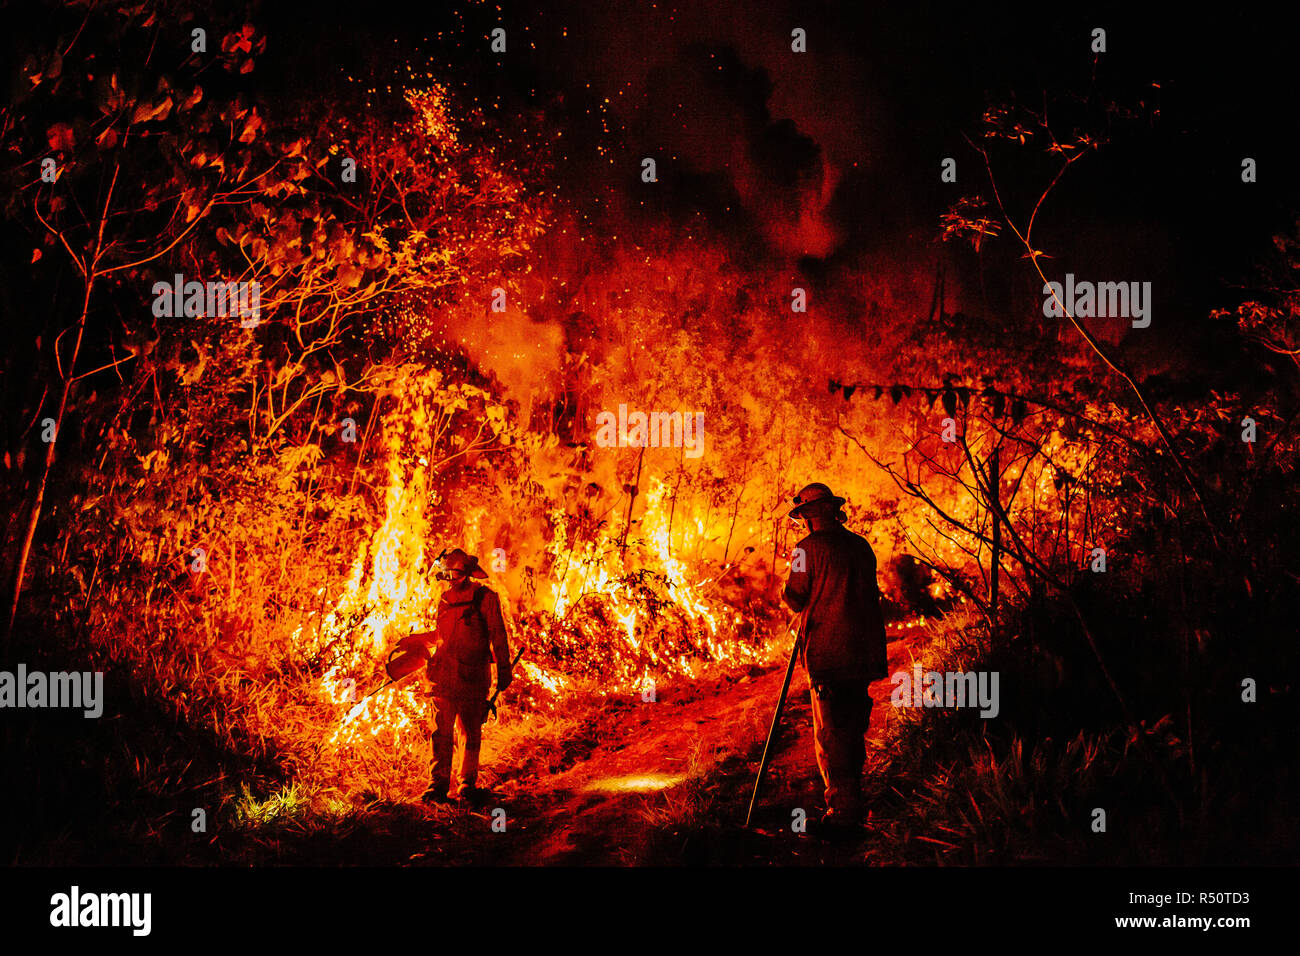 View of two firefighters during forest fire, Guanaba, Queensland, Australia Stock Photo